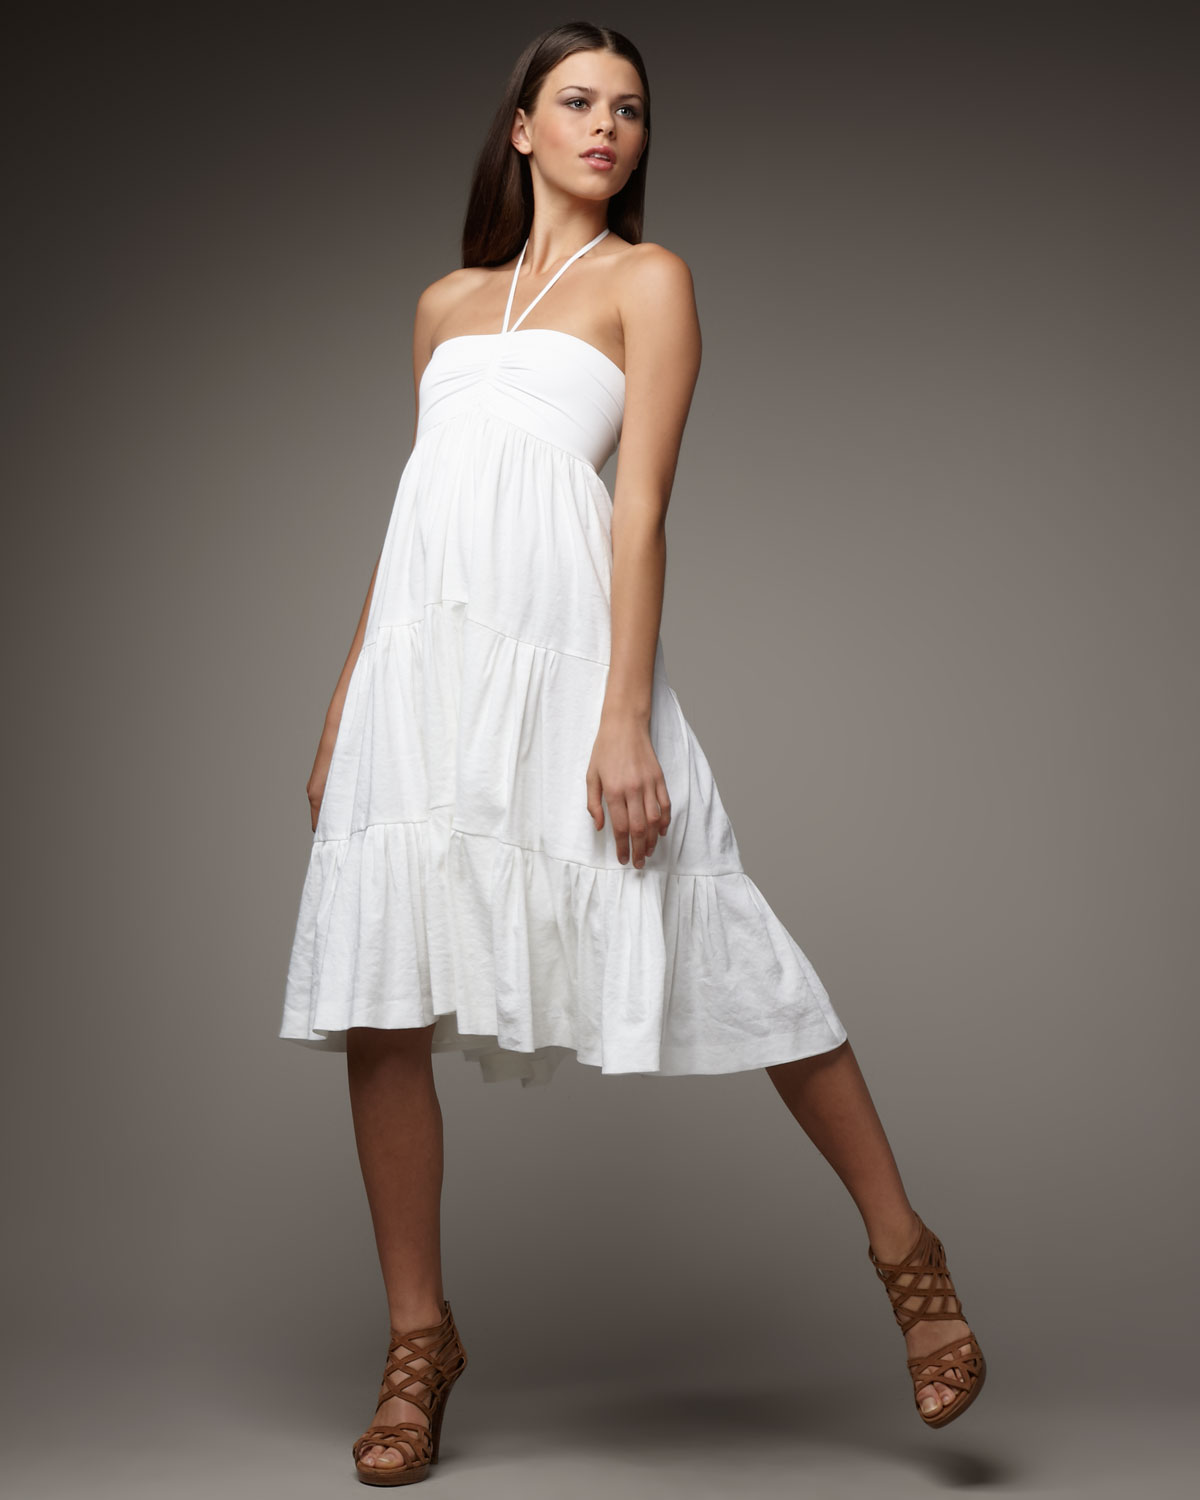 Lyst - Theory Tiered Halter Dress in White1200 x 1500